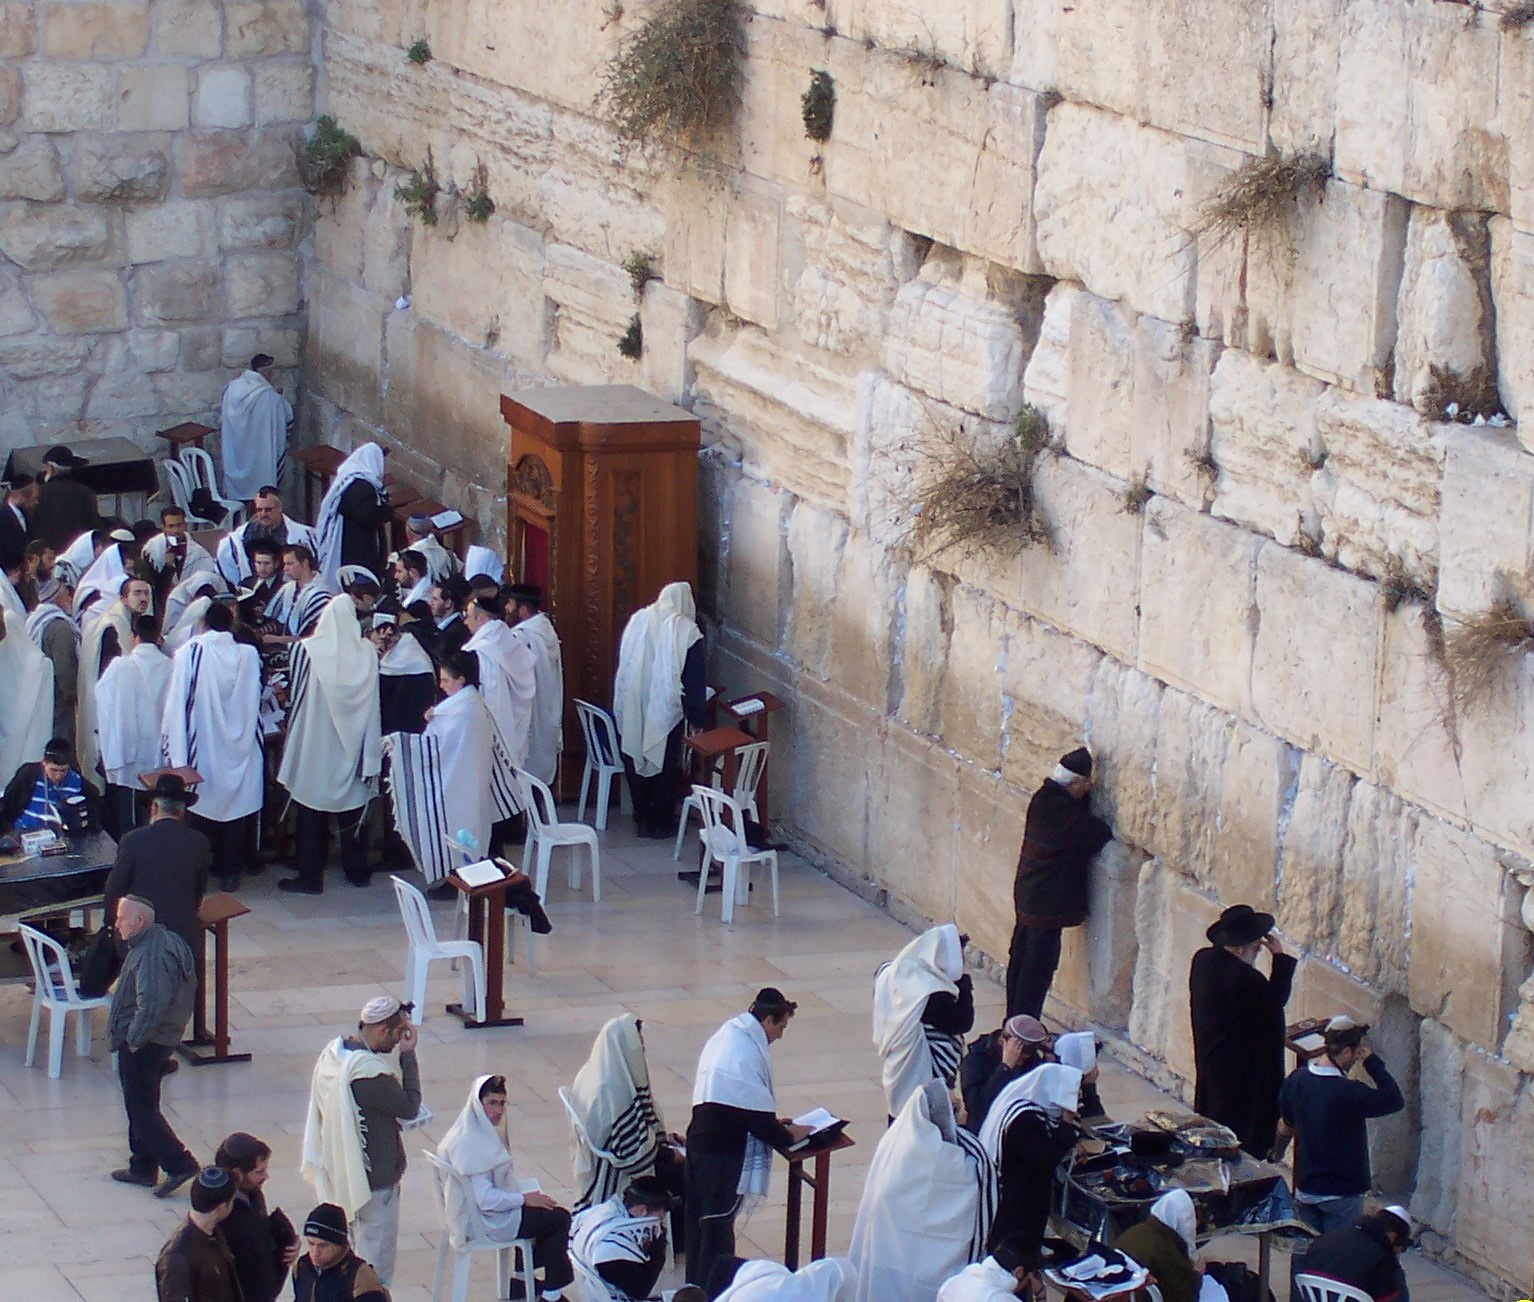 The Western Wall, where the Jewish pray daily.